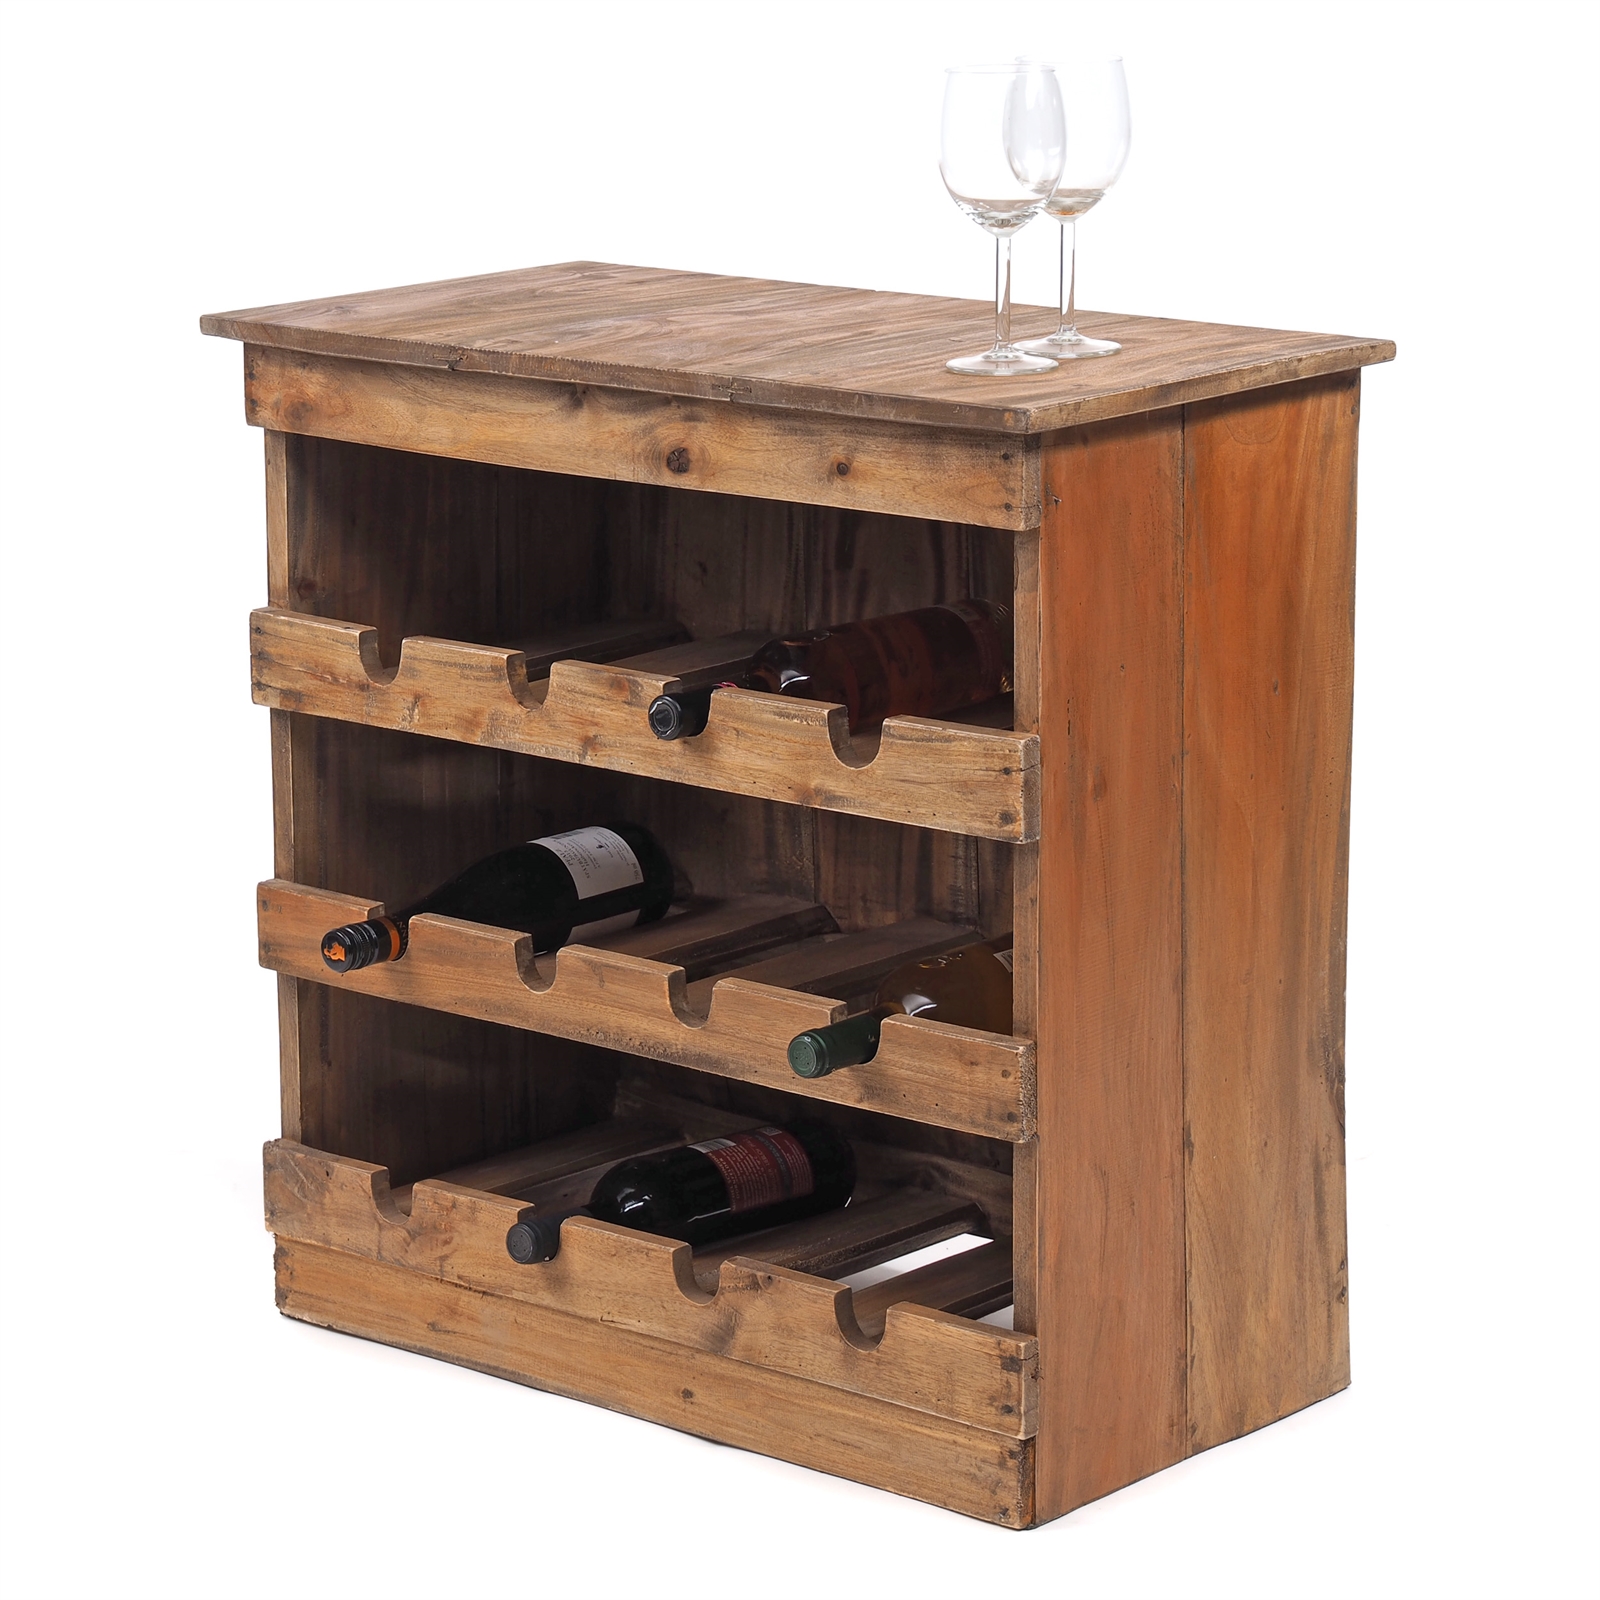 Bottle Stand Rustique Recycled Wood Solid 70x70x38cm Hxwxd